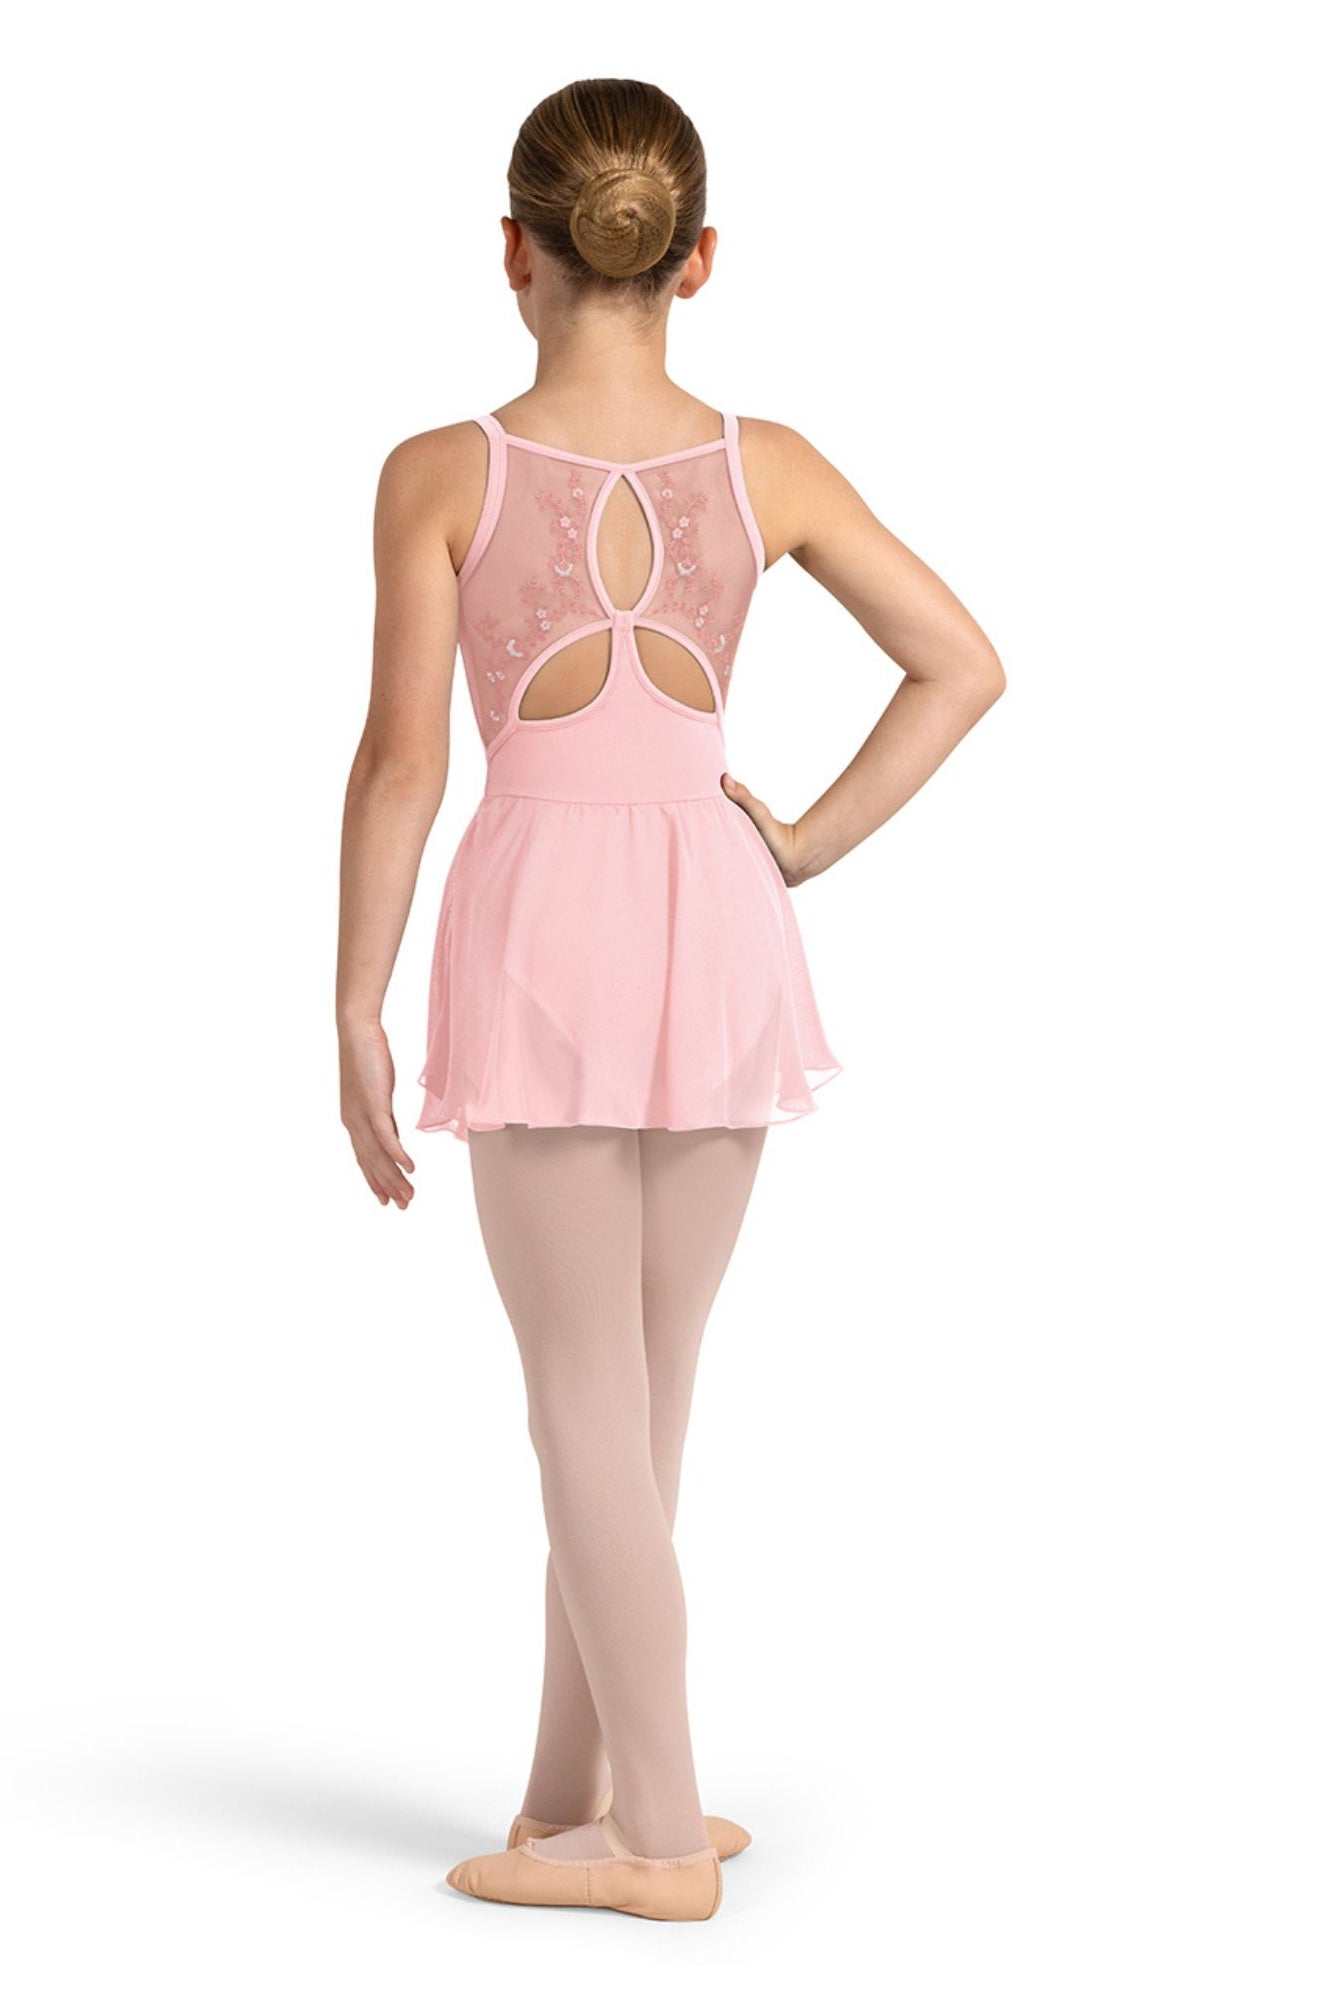 CL4217 Embroidered Poppy Skirted Camisole Leotard Candy Pink Back